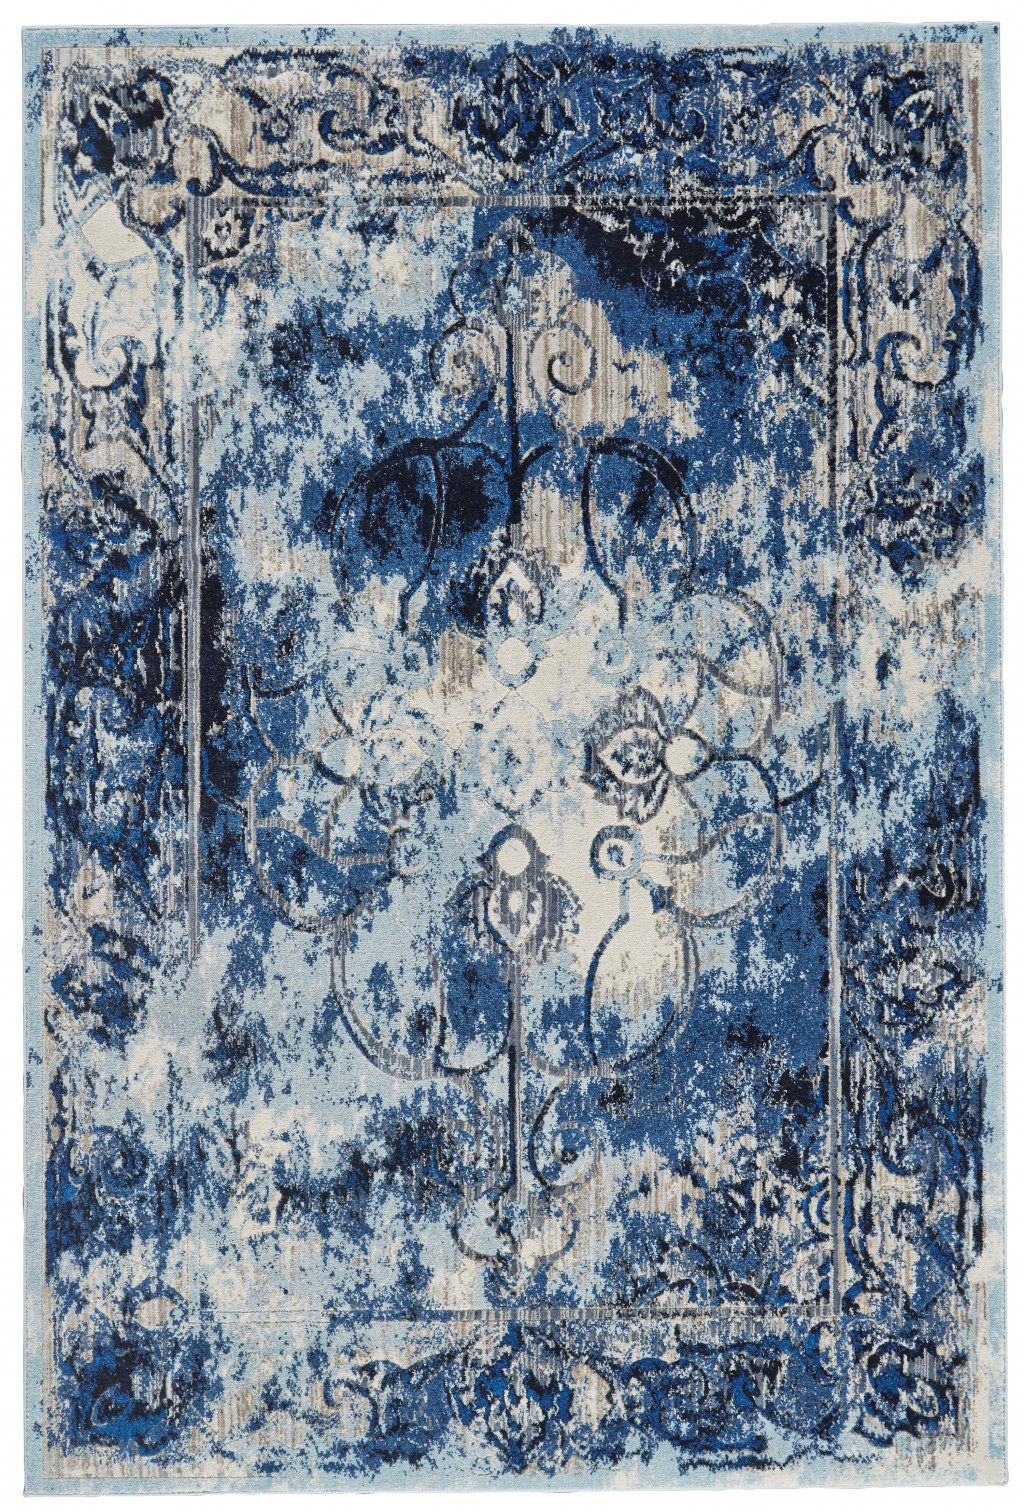 7' X 10' Blue Ivory And Gray Floral Distressed Stain Resistant Area Rug-511244-1